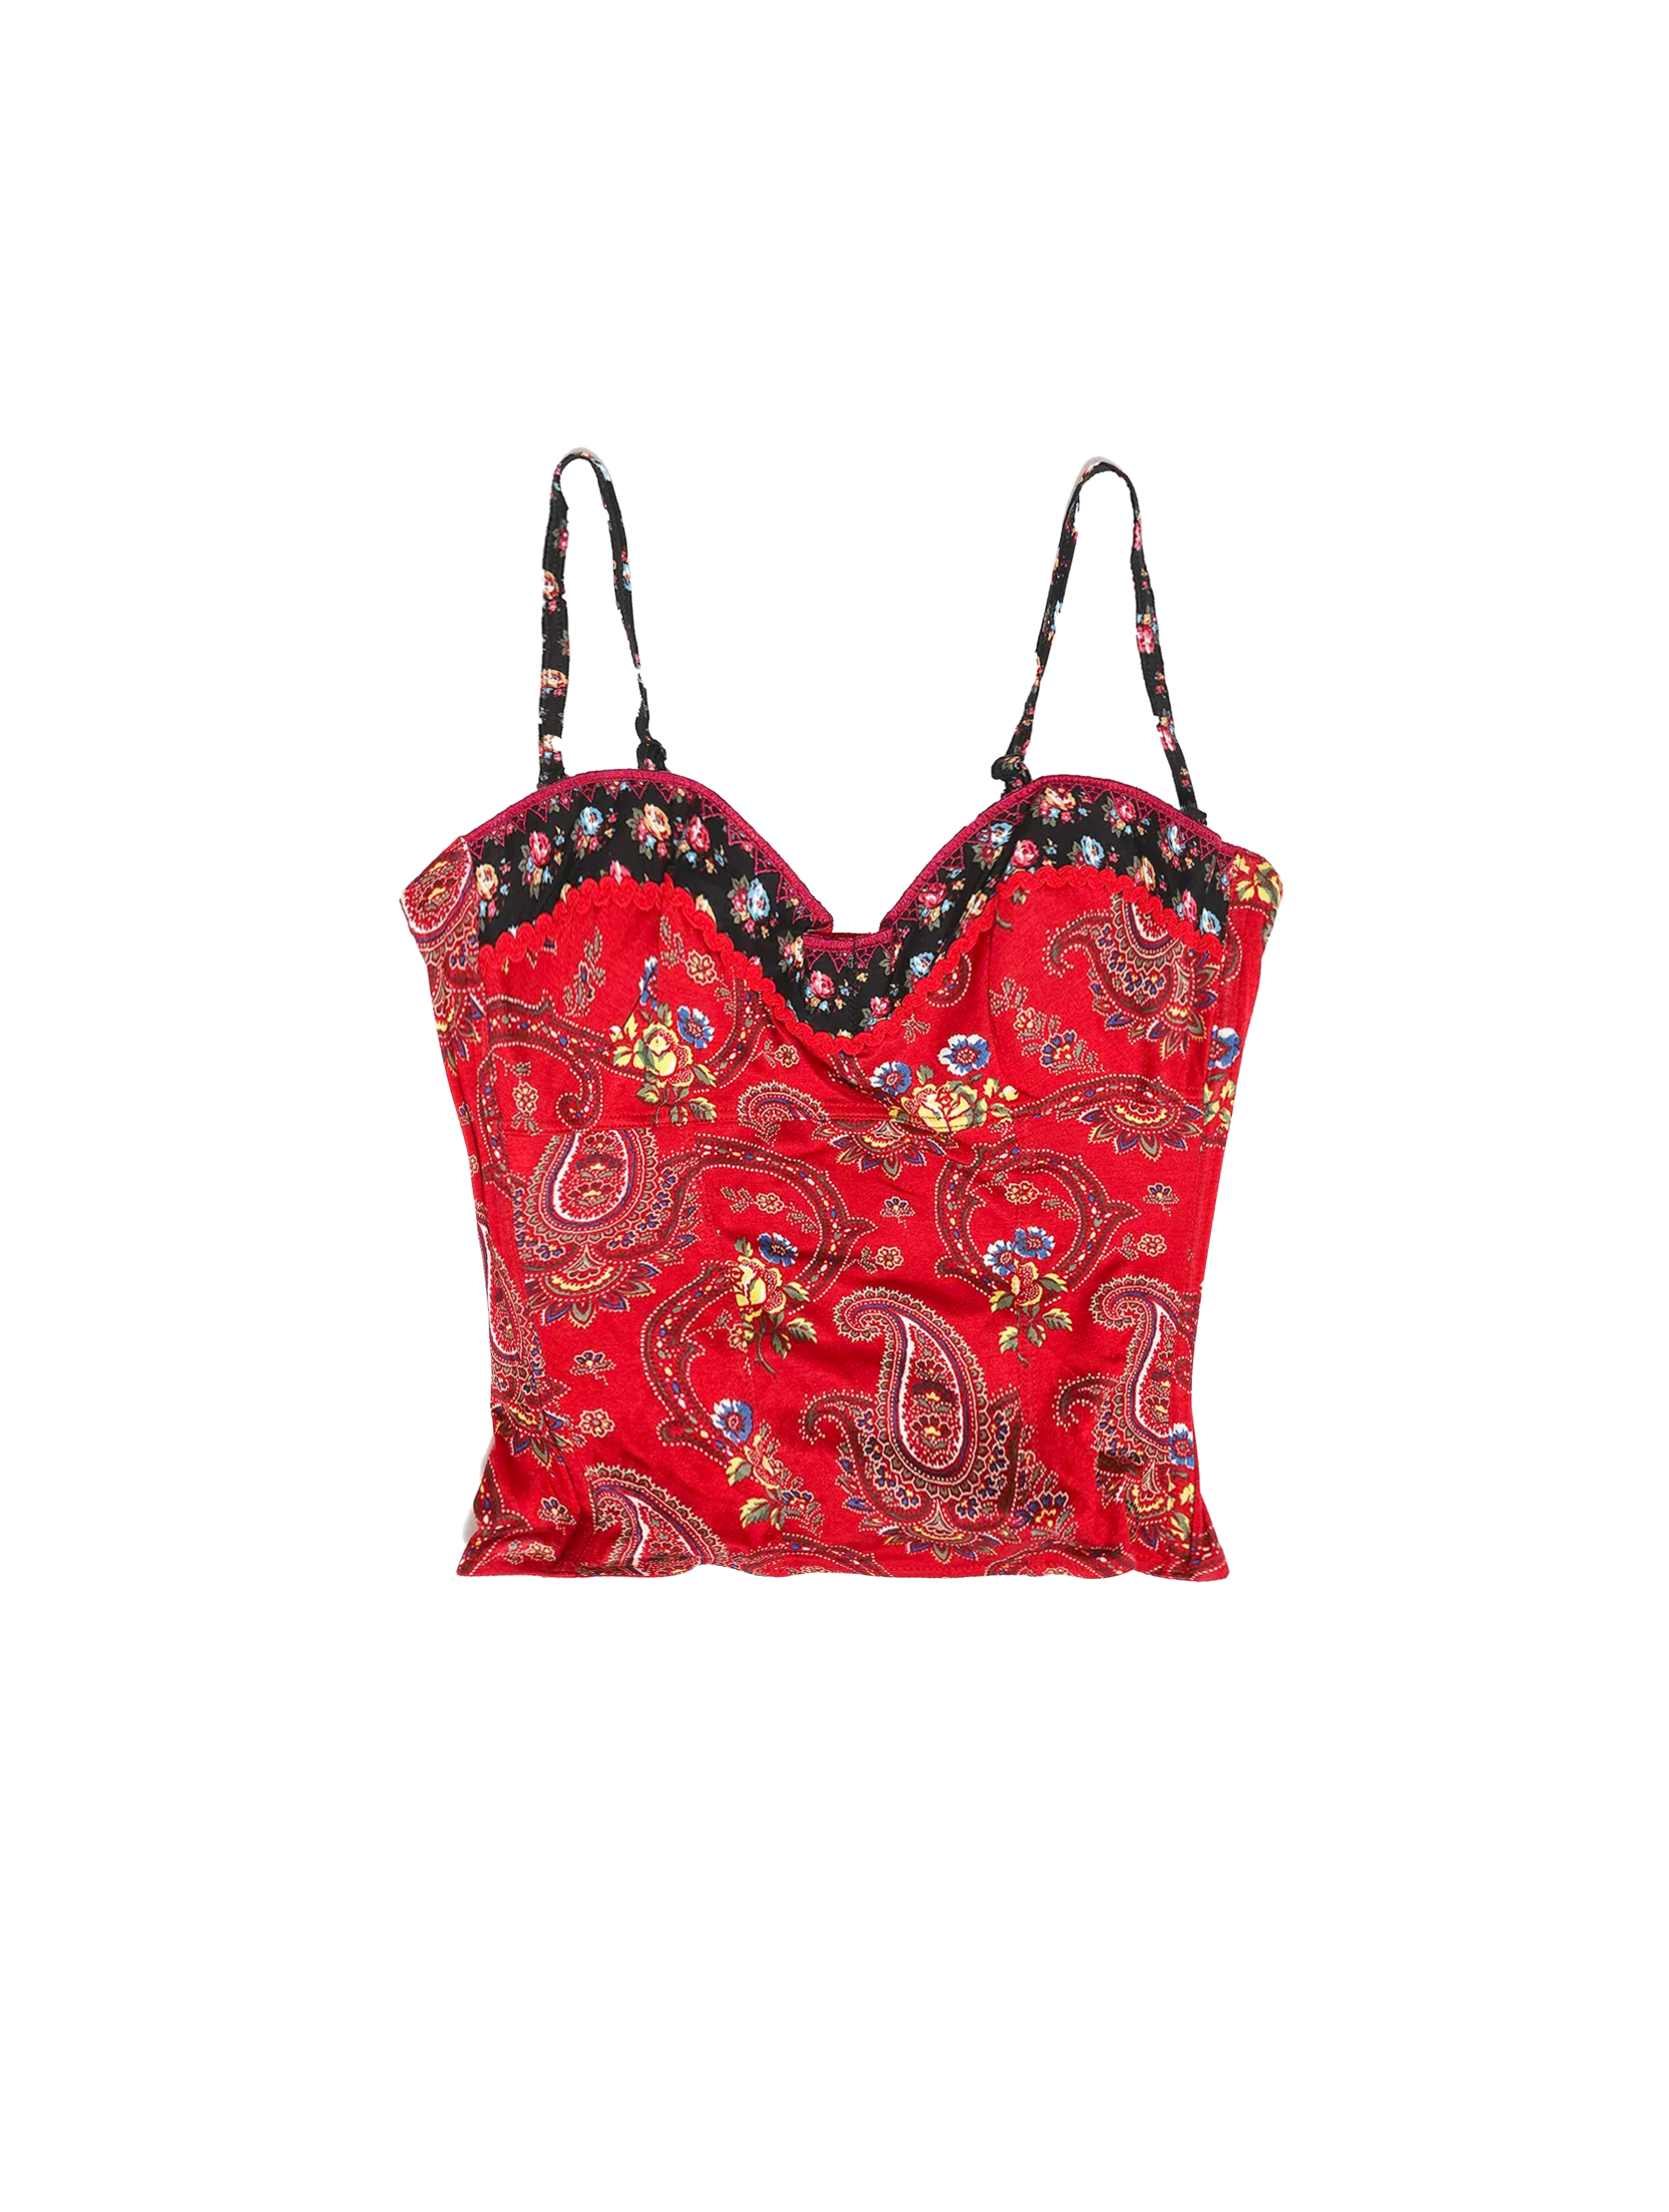 Christian Dior Rare Red 2002 Paisley Bustier